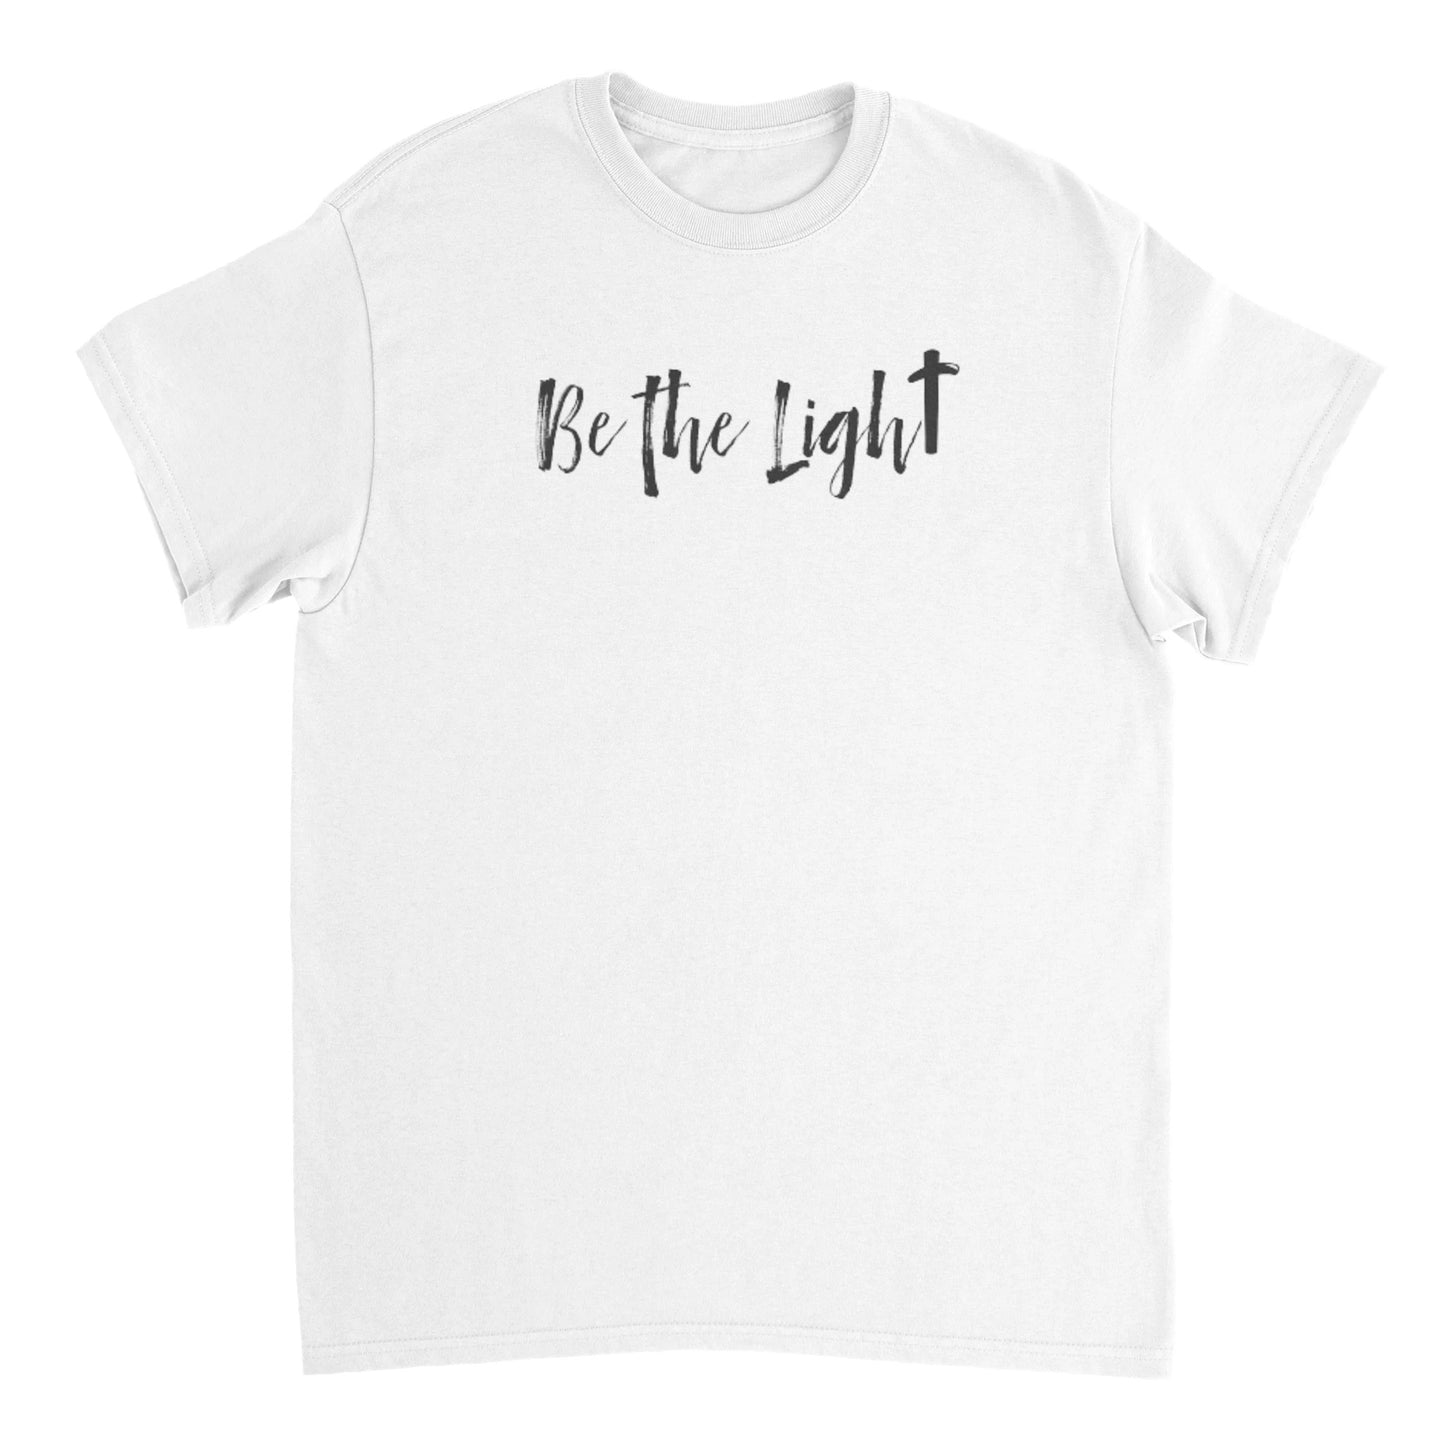 Be the Light - Front / Be Kind On Back